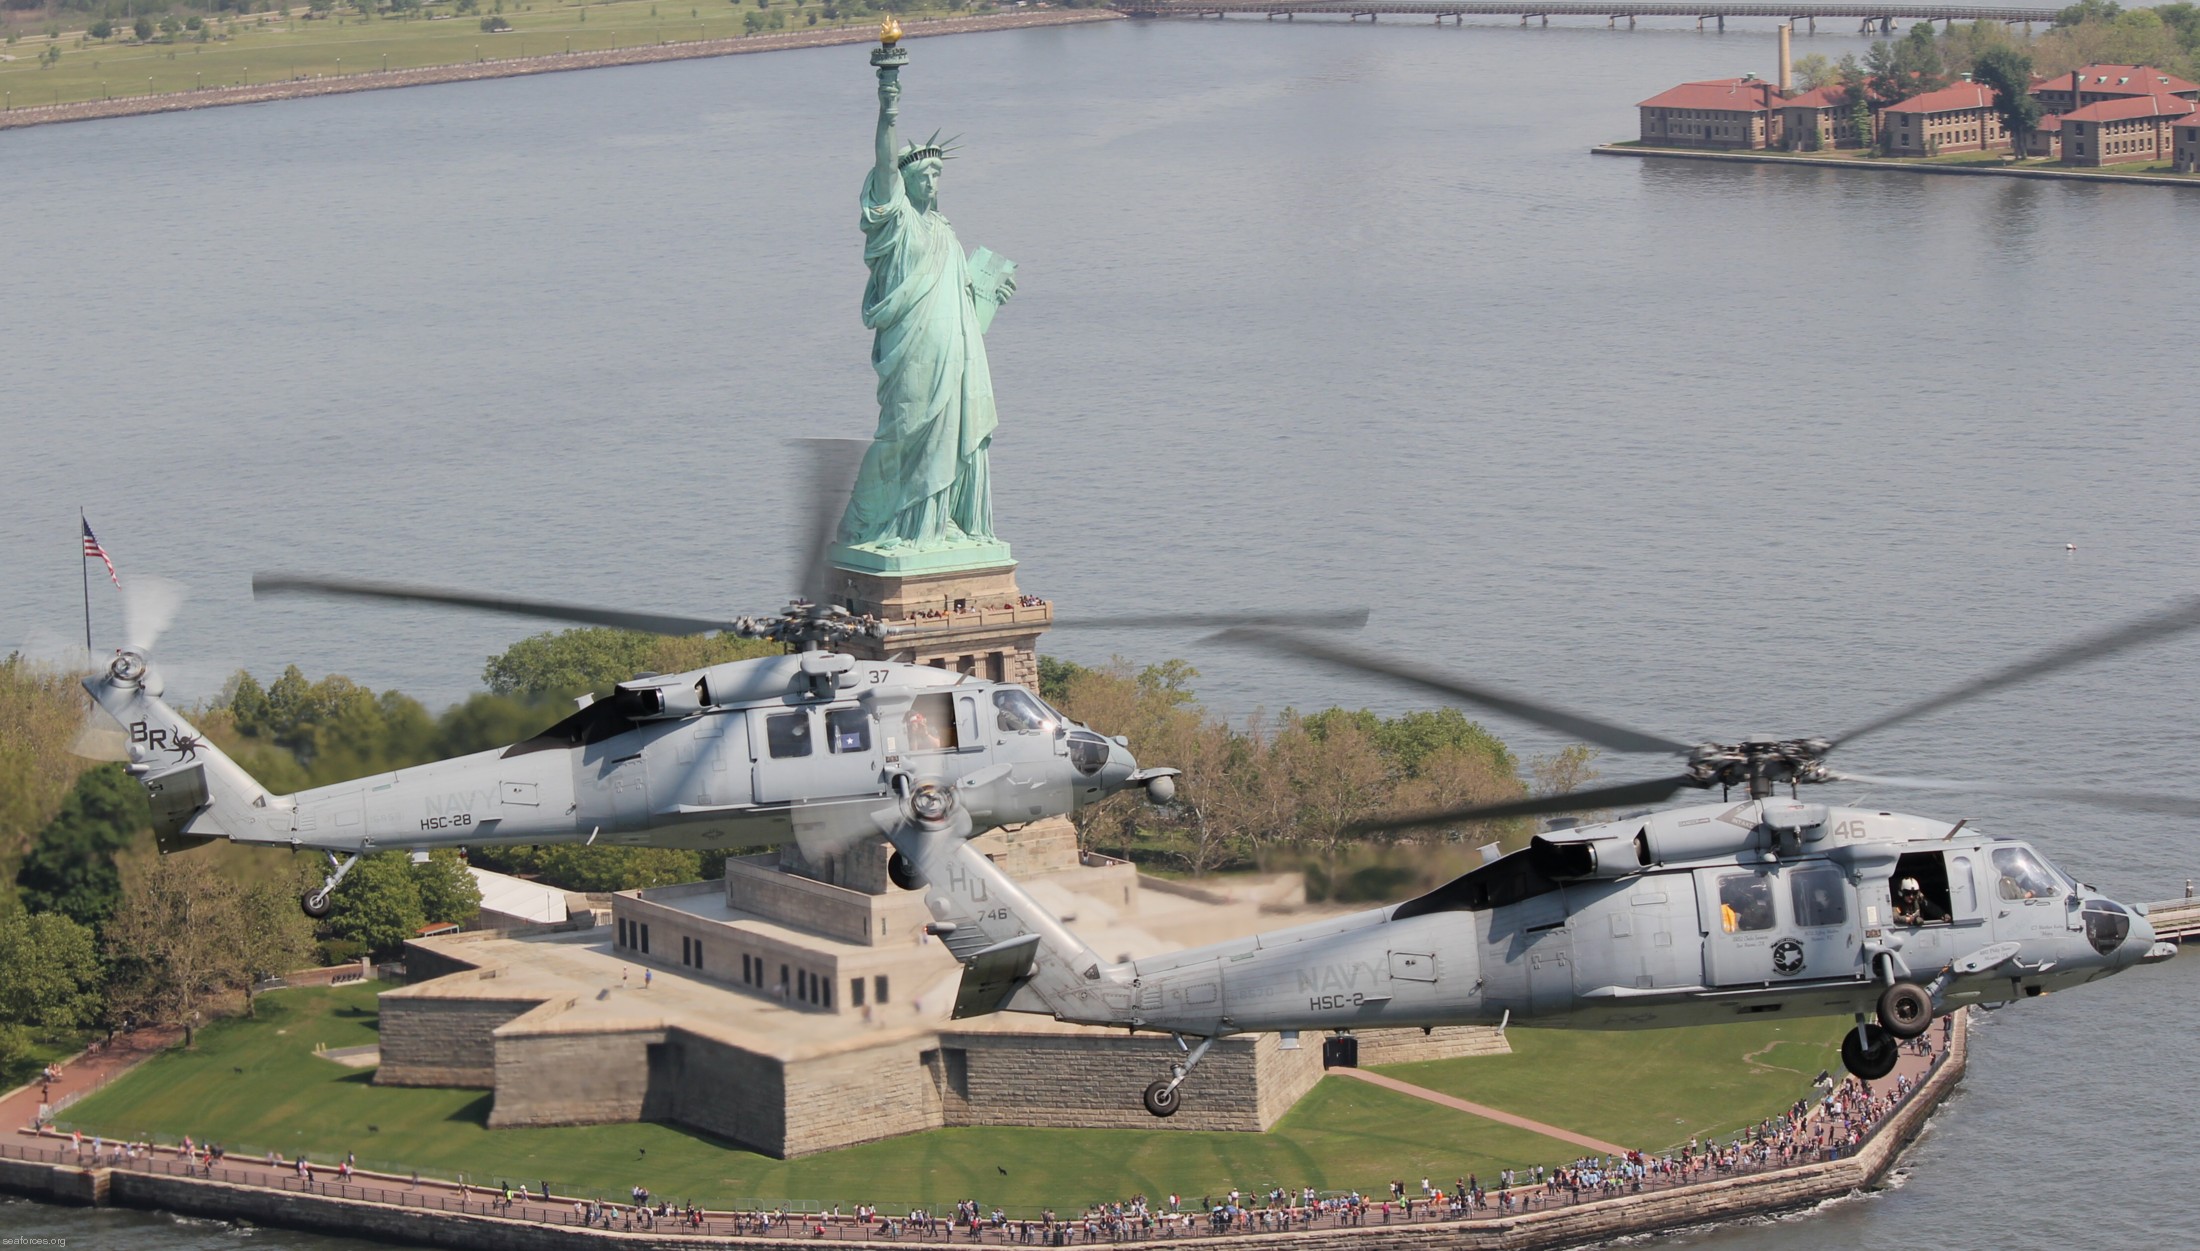 hsc-28 dragon whales helicopter sea combat squadron mh-60s seahawk us navy 68 new york fleet week